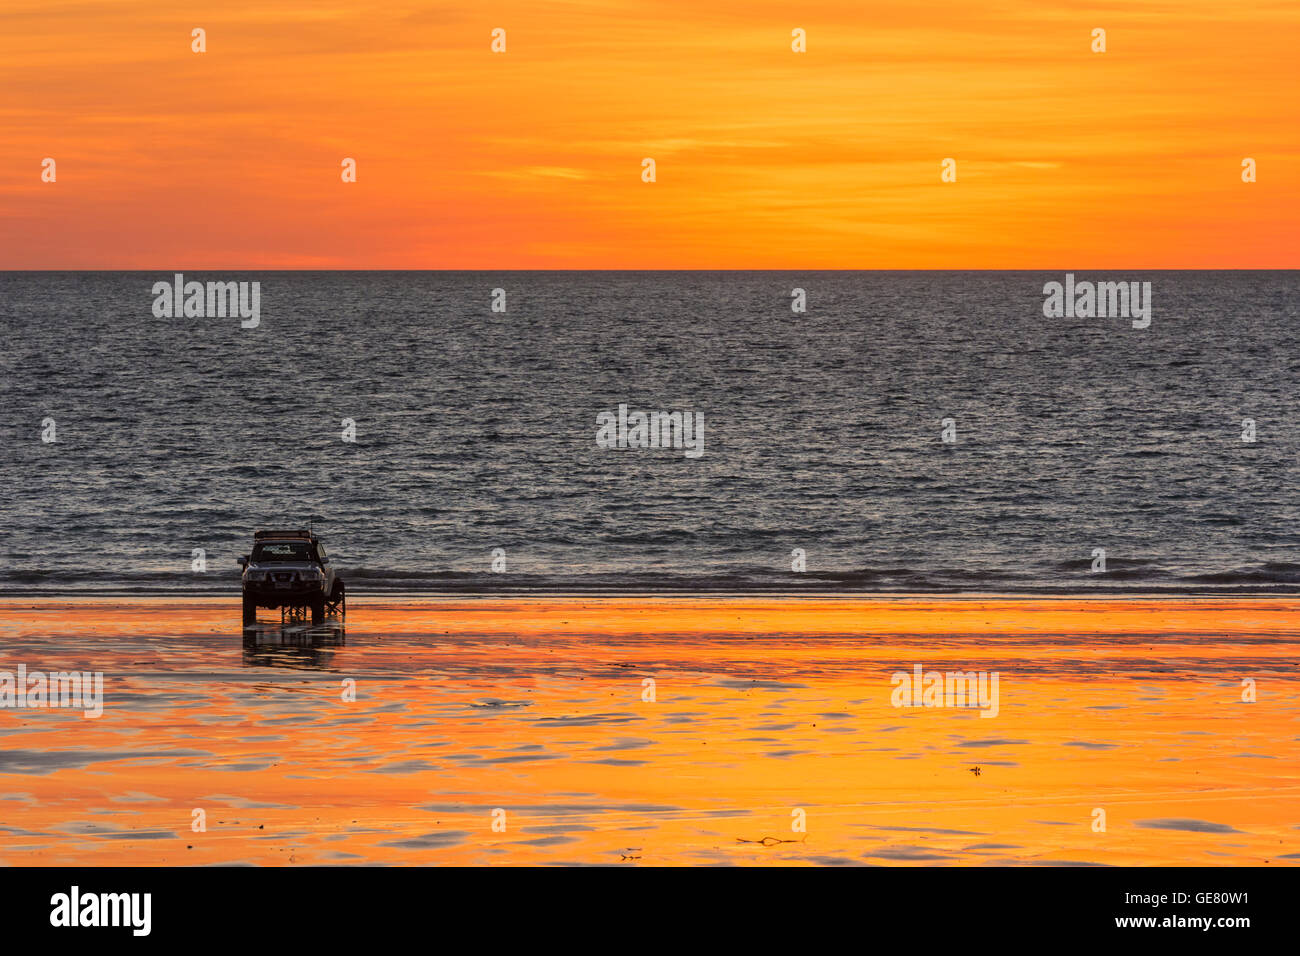 Broome's Cable Beach at sunset, with a four wheel drive vehicle parked on the golden sands, Broome, Kimberley, Western Australia, Australia Stock Photo